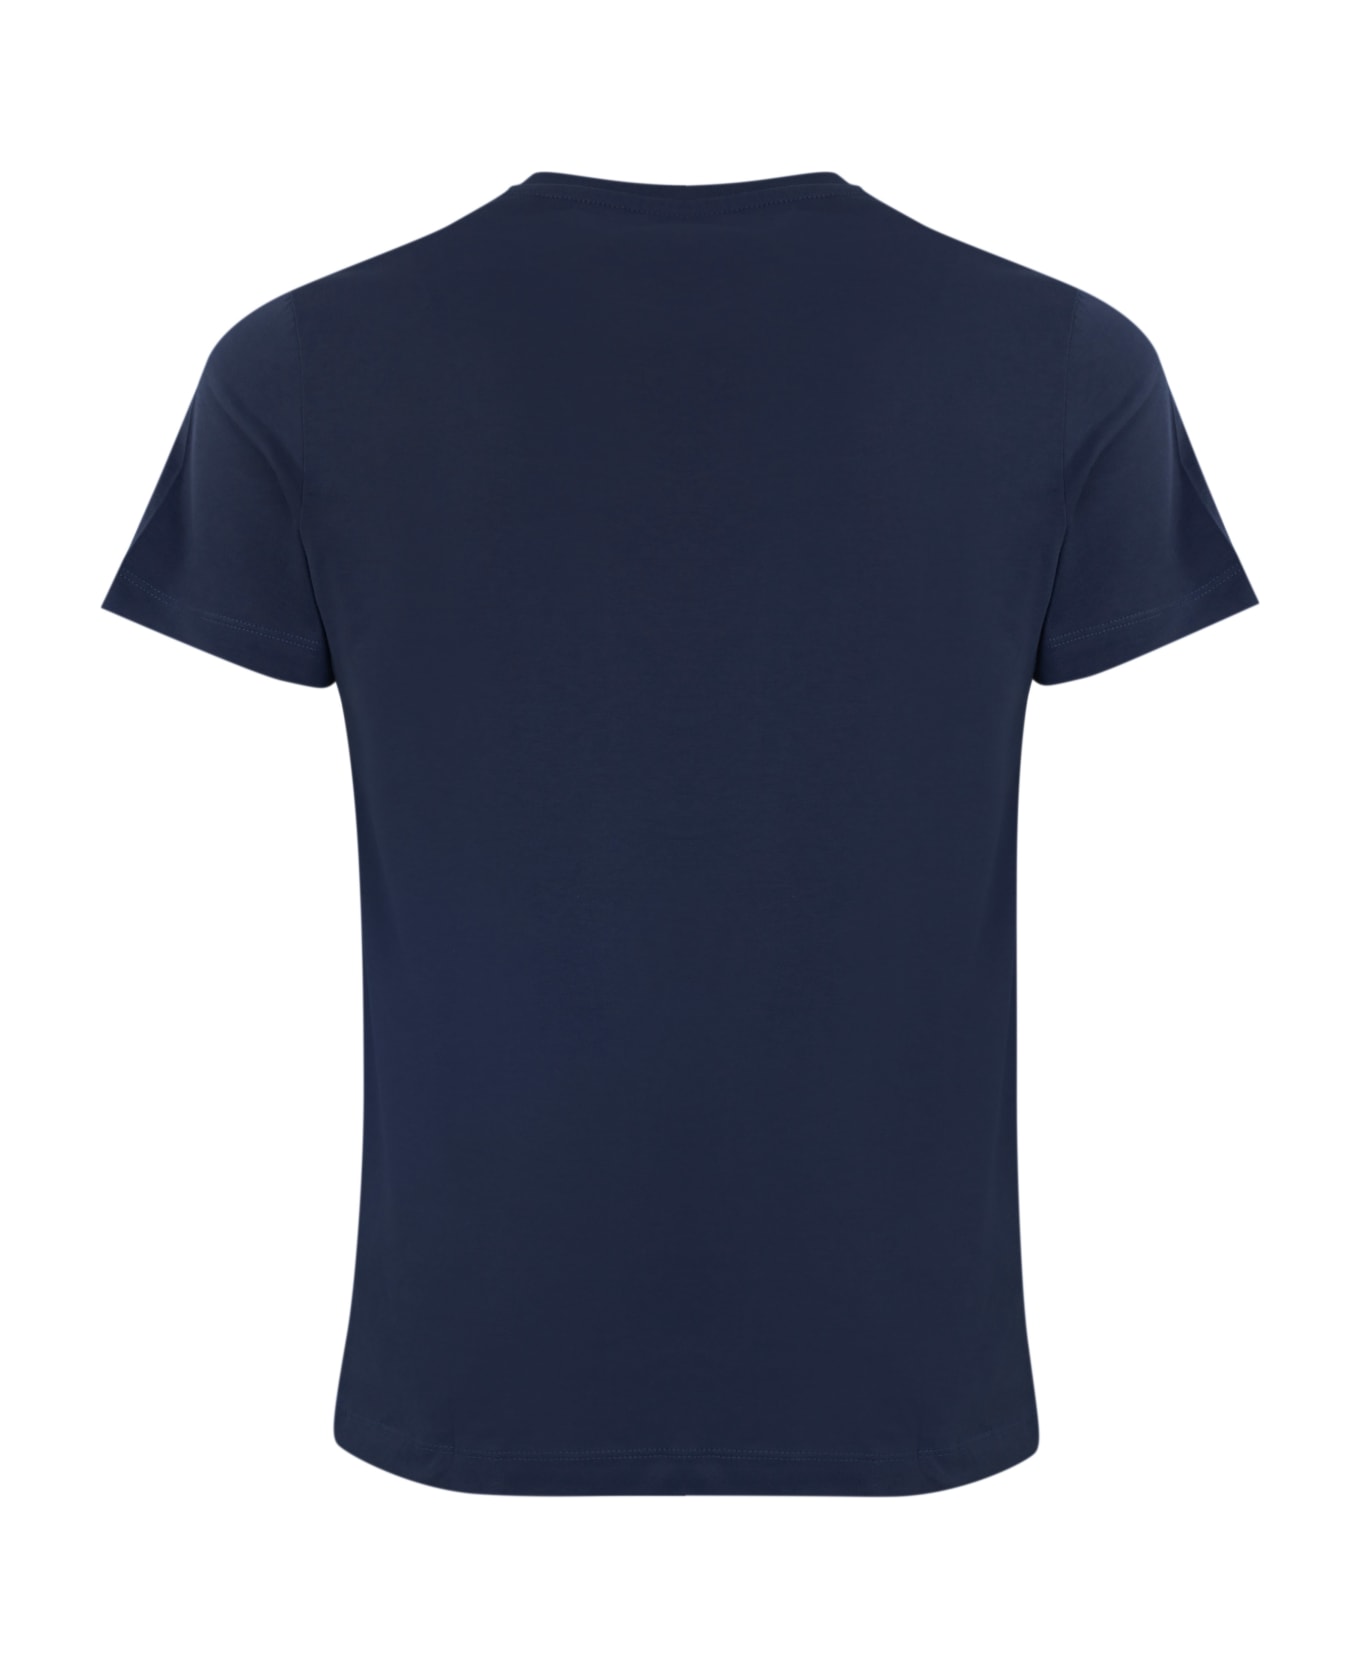 Roy Rogers Blue Cotton T-shirt With Pocket - Navy blue シャツ